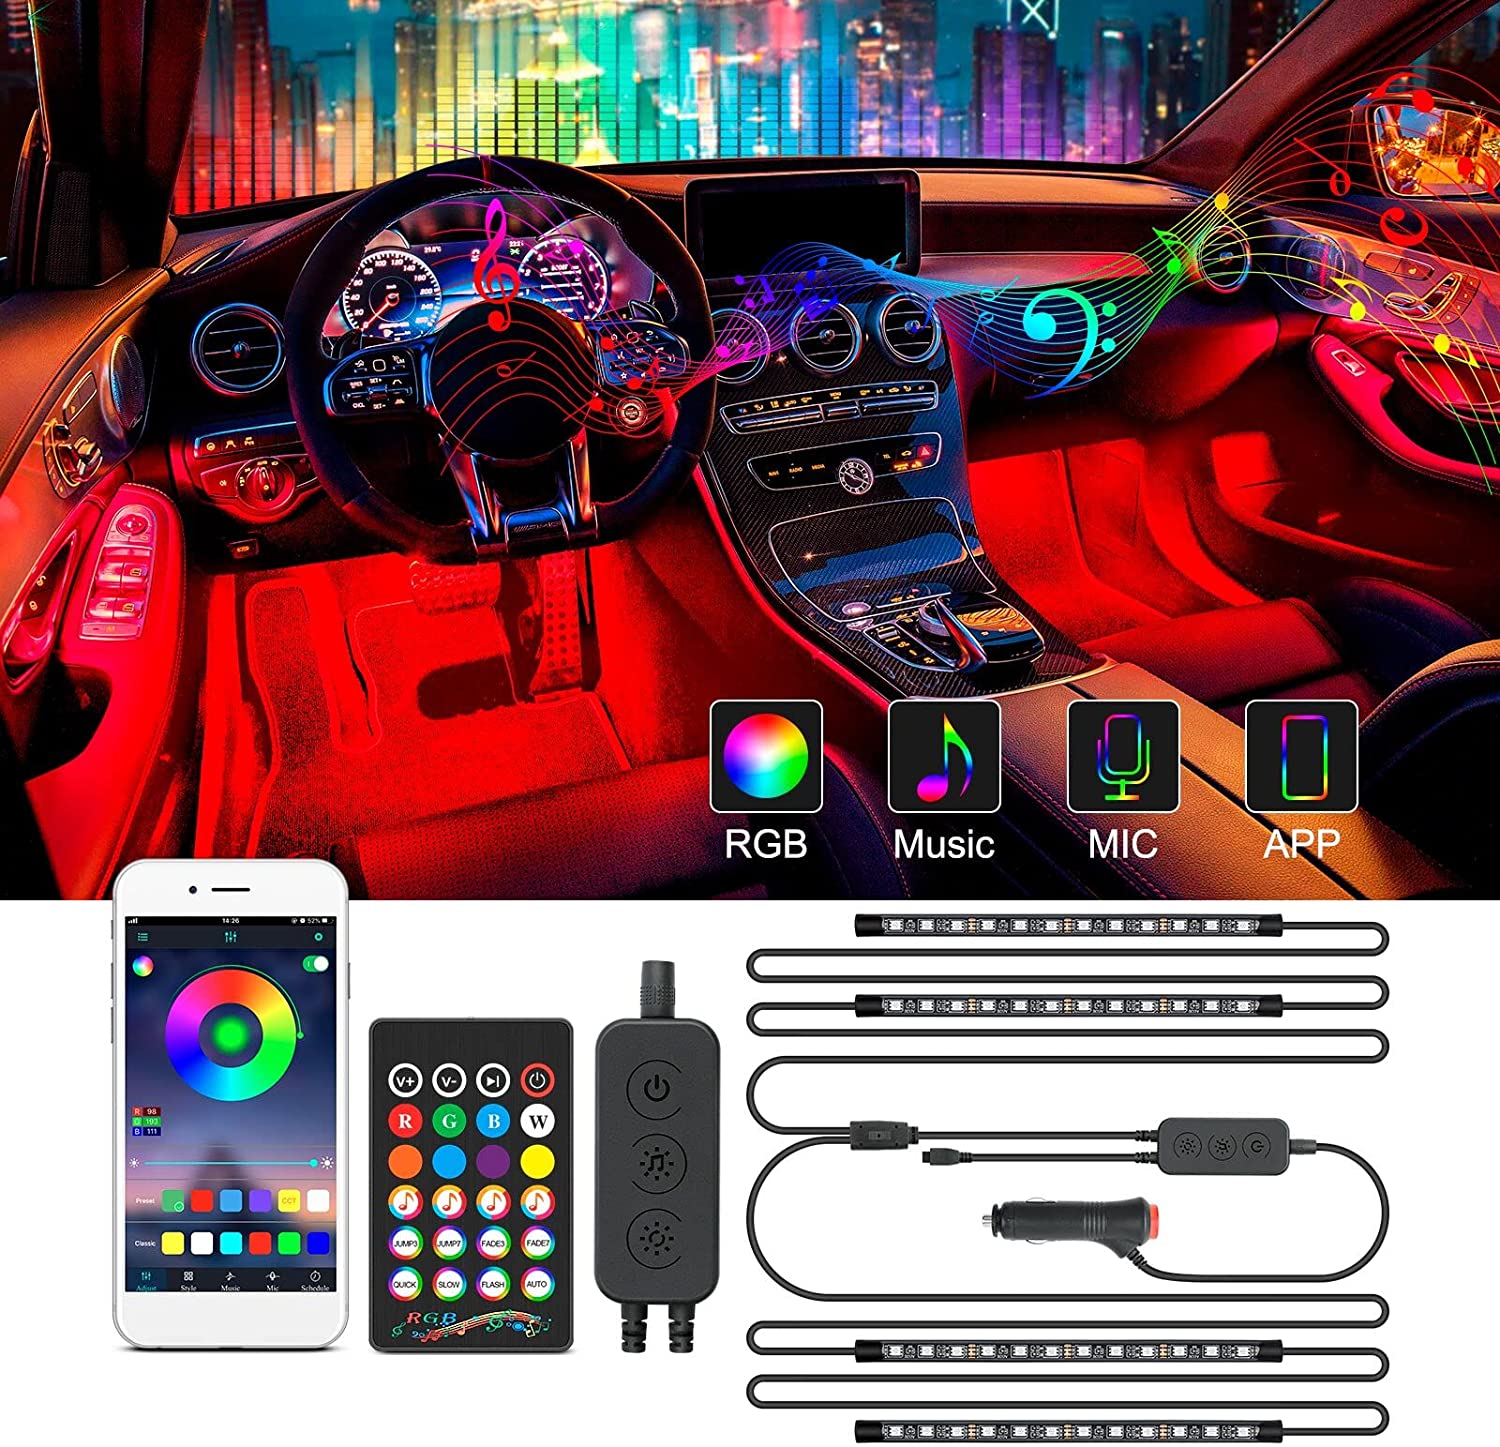 Mictuning Rgb Car Interior Lights 4pcs 48 Leds Led Strip Atmosphere Light With Remote And Control Box Music Sync Waterproof